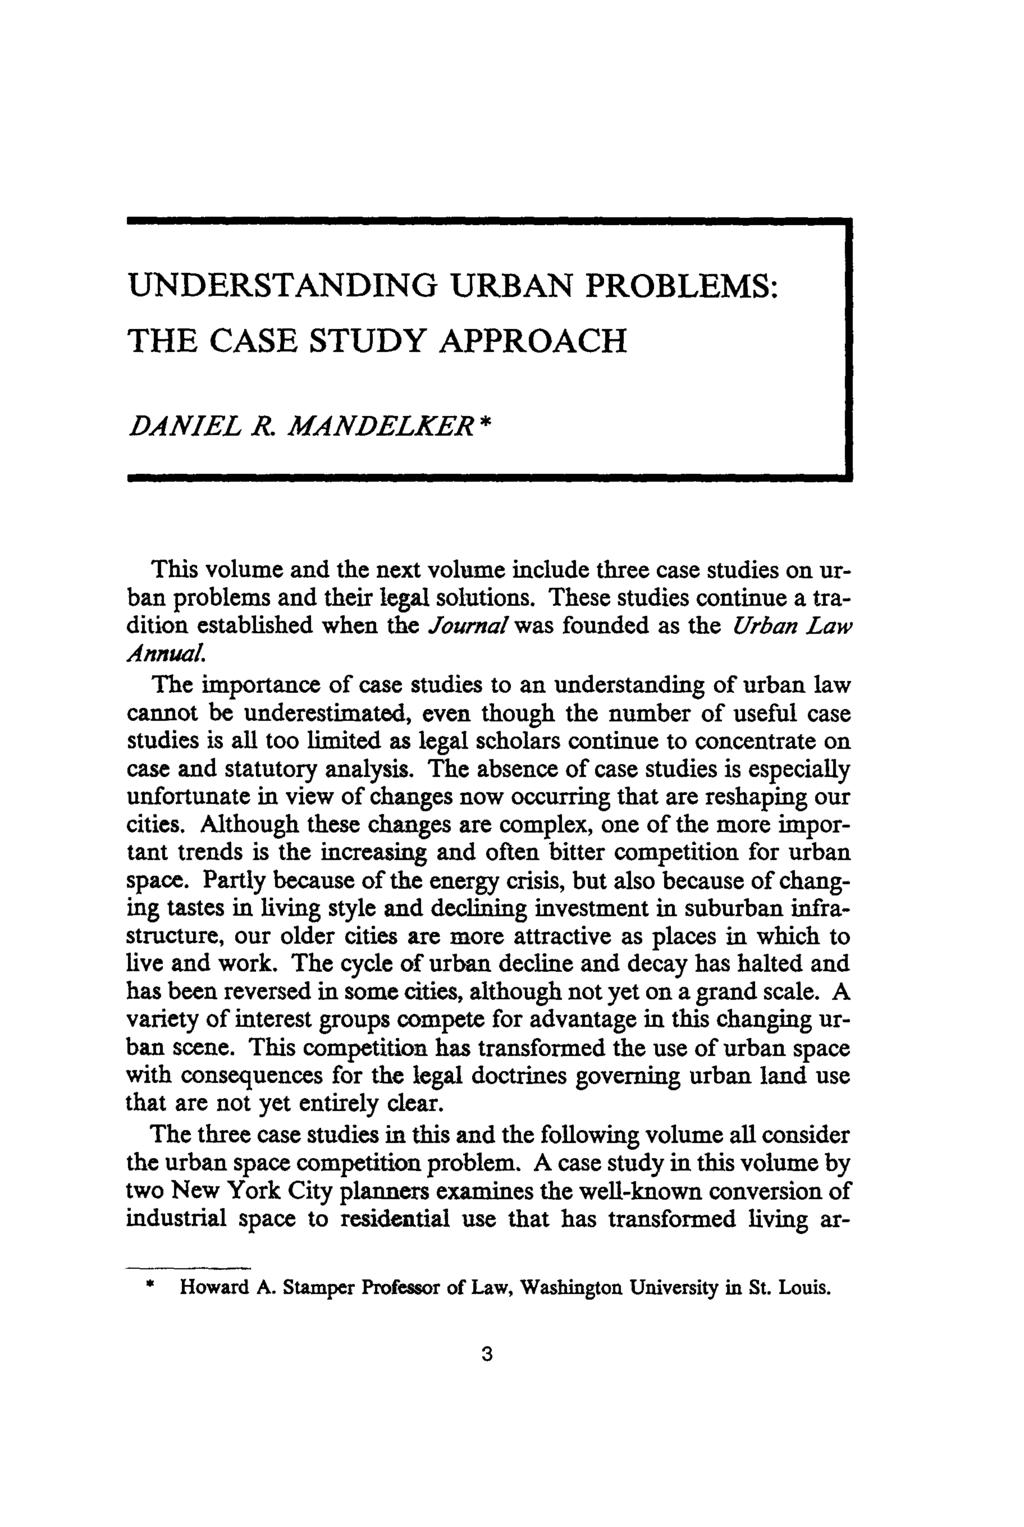 UNDERSTANDING URBAN PROBLEMS: THE CASE STUDY APPROACH DANIEL R. MANDELKER * This volume and the next volume include three case studies on urban problems and their legal solutions.